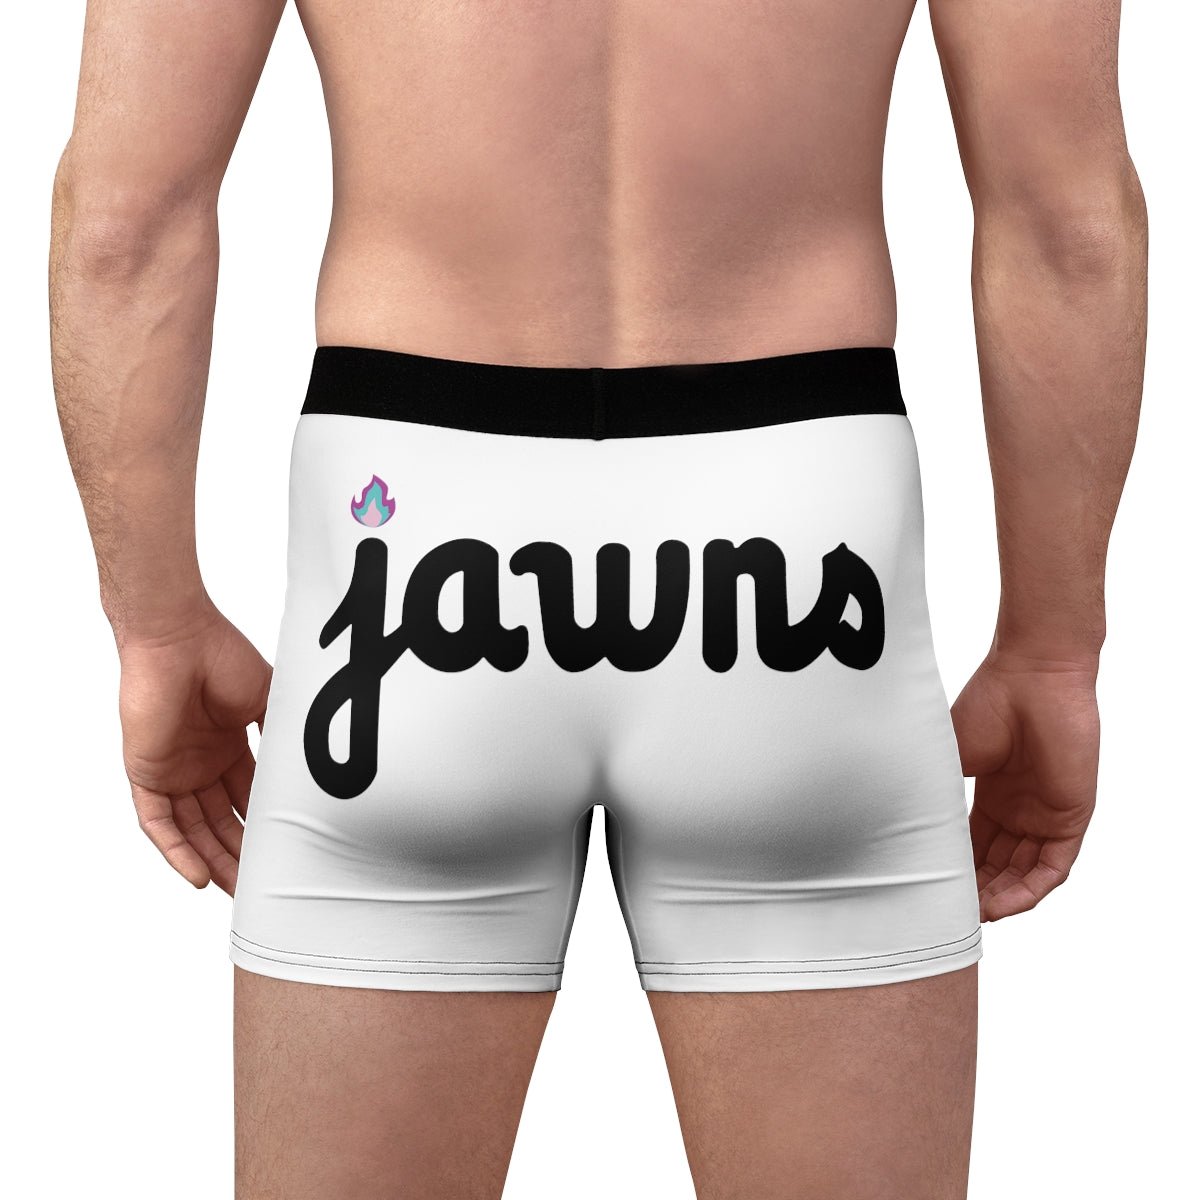 Jawns on Fire Men's Boxer Briefs - All Over Prints - Jawns On Fire - Jawns on Fire